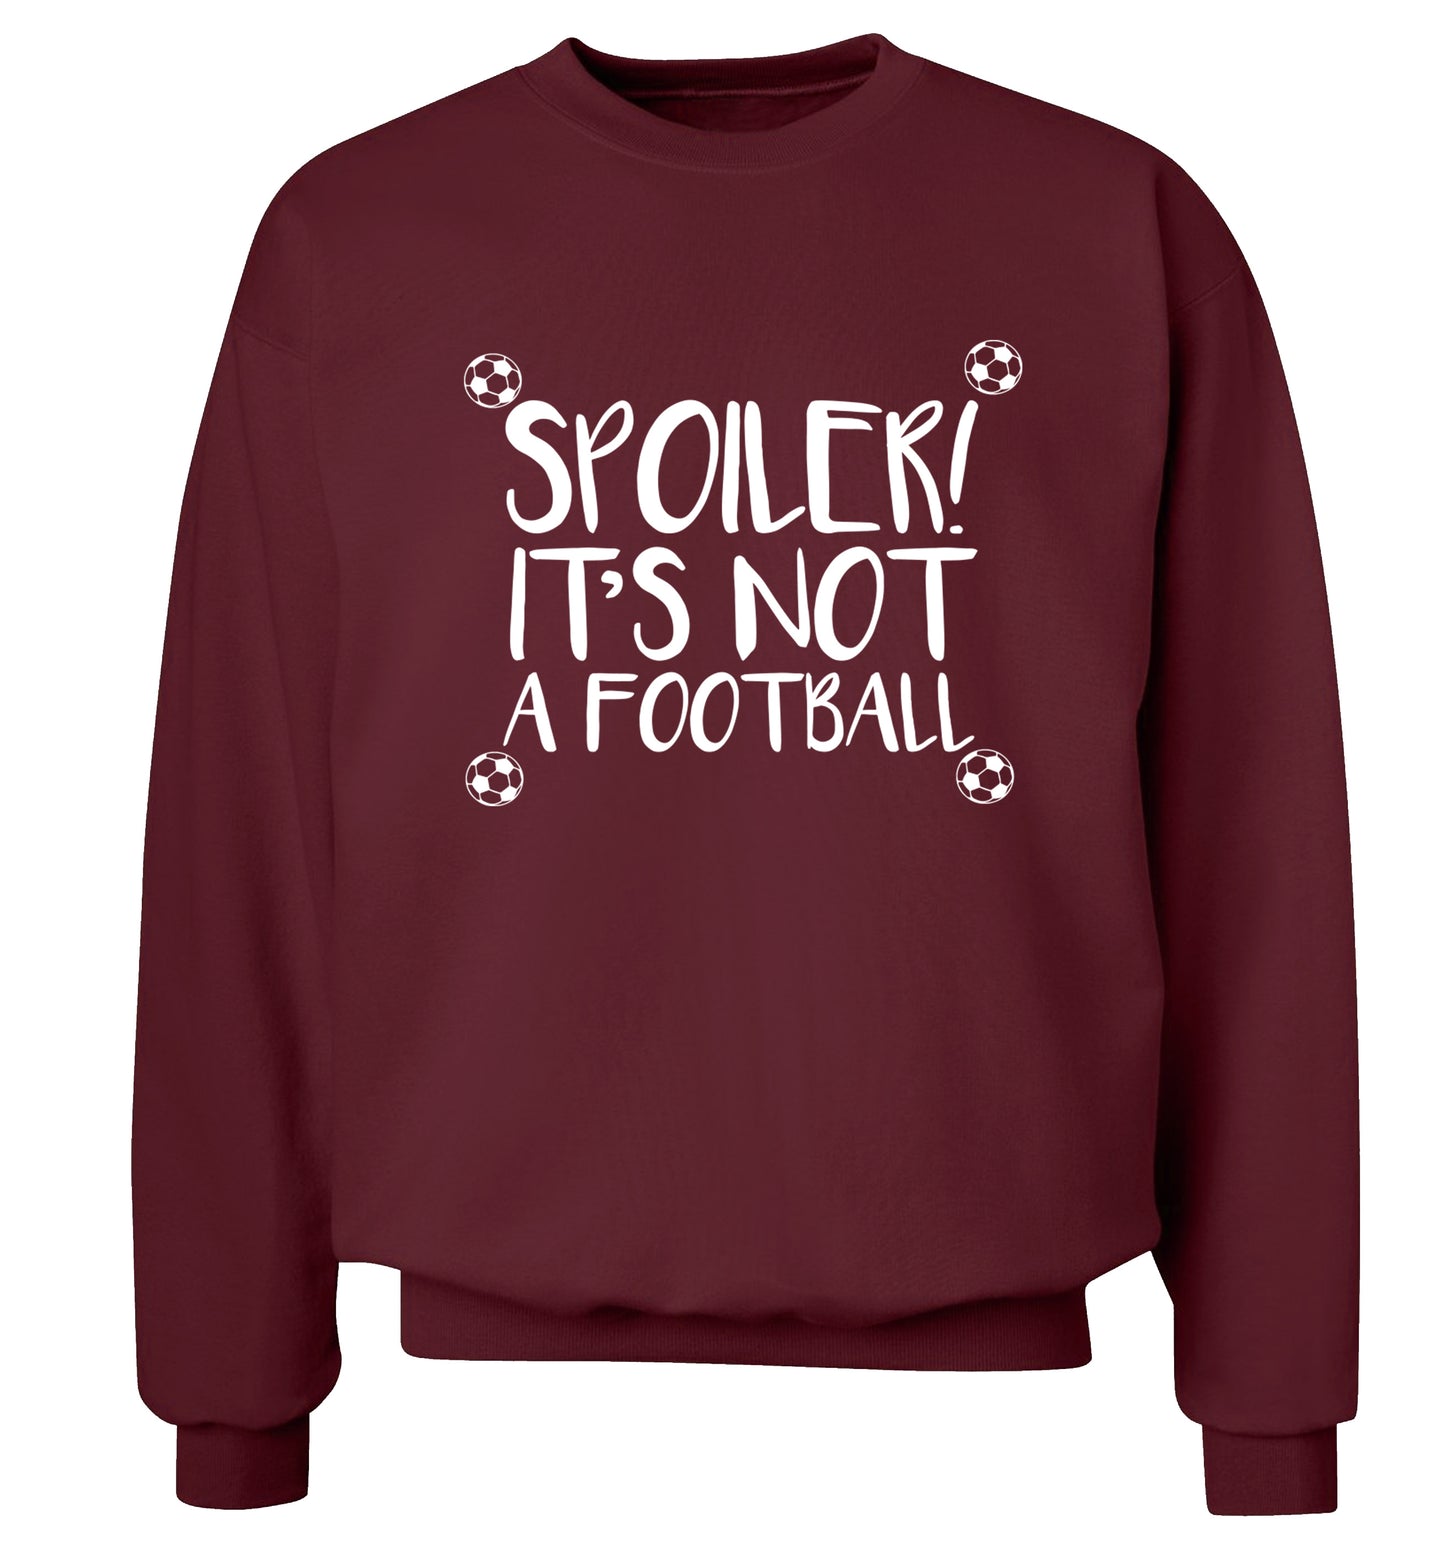 Spoiler it's not a football Adult's unisex maroon Sweater 2XL